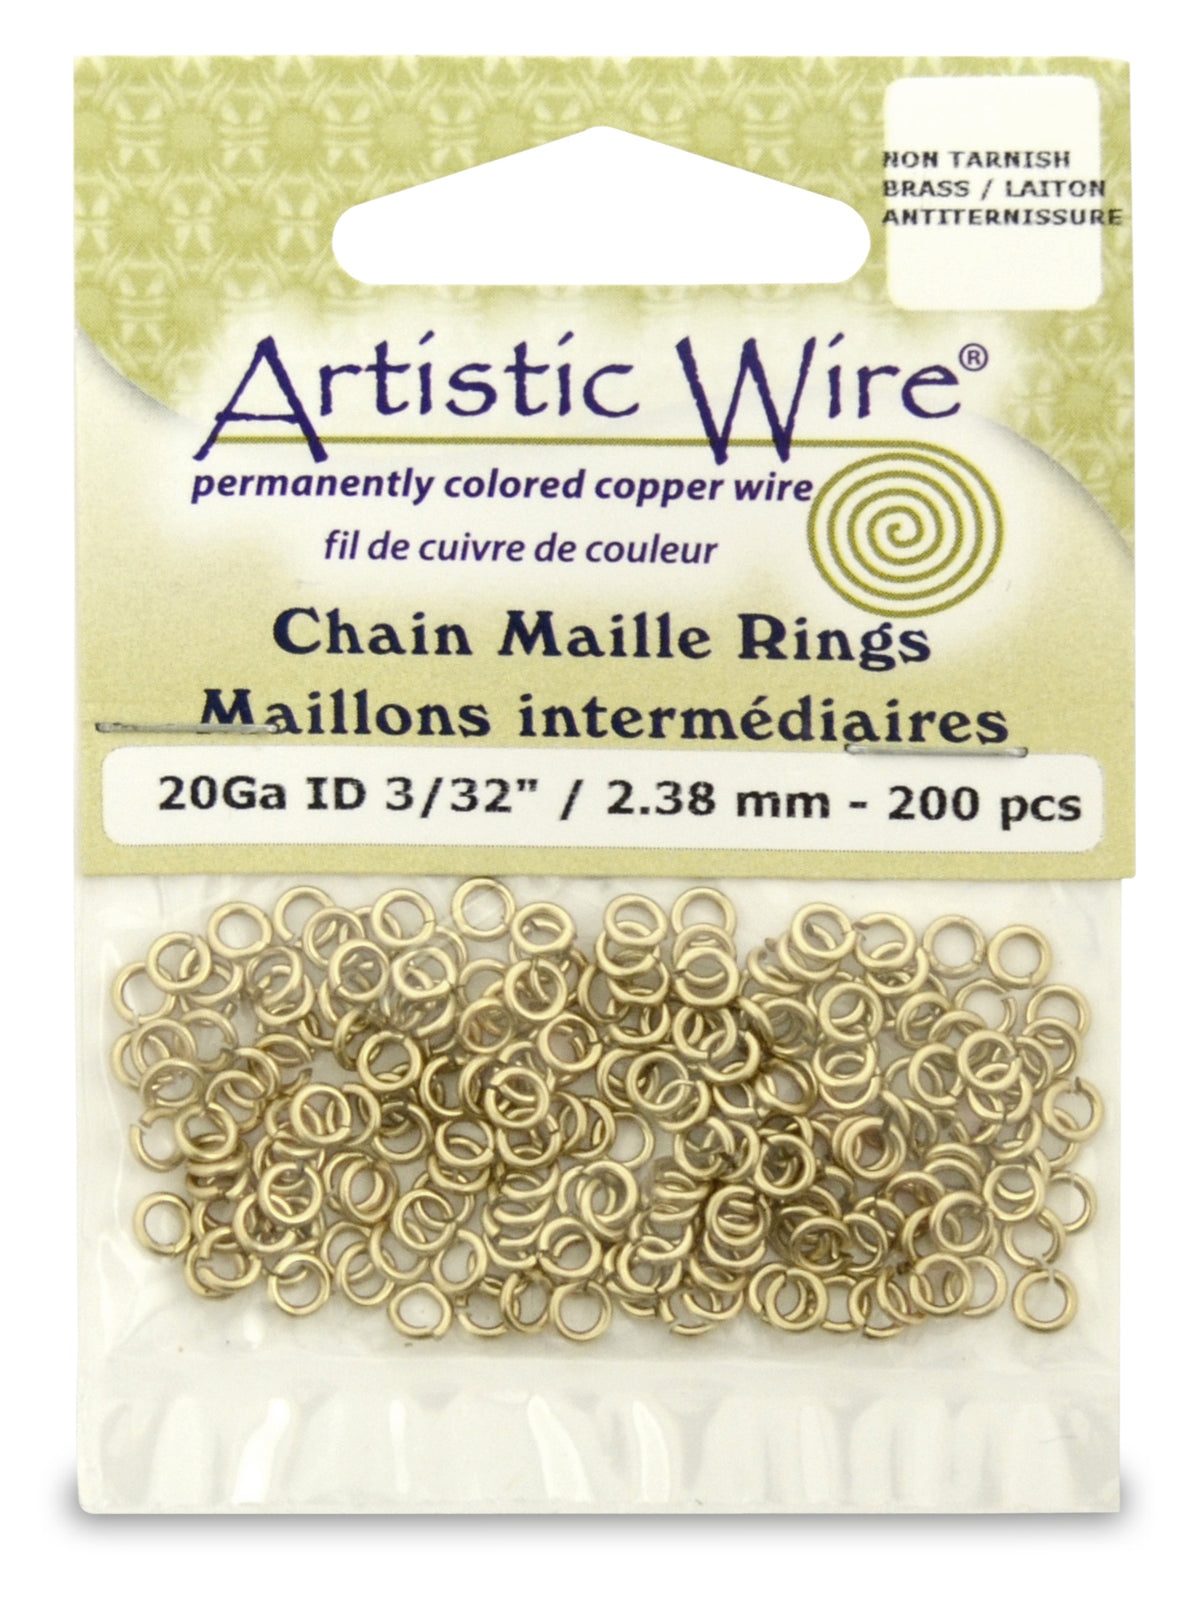 20 Gauge Artistic Wire, Chain Maille Rings, Round, Tarnish Resistant Brass, 3/32 in (2.38 mm), 200 pc